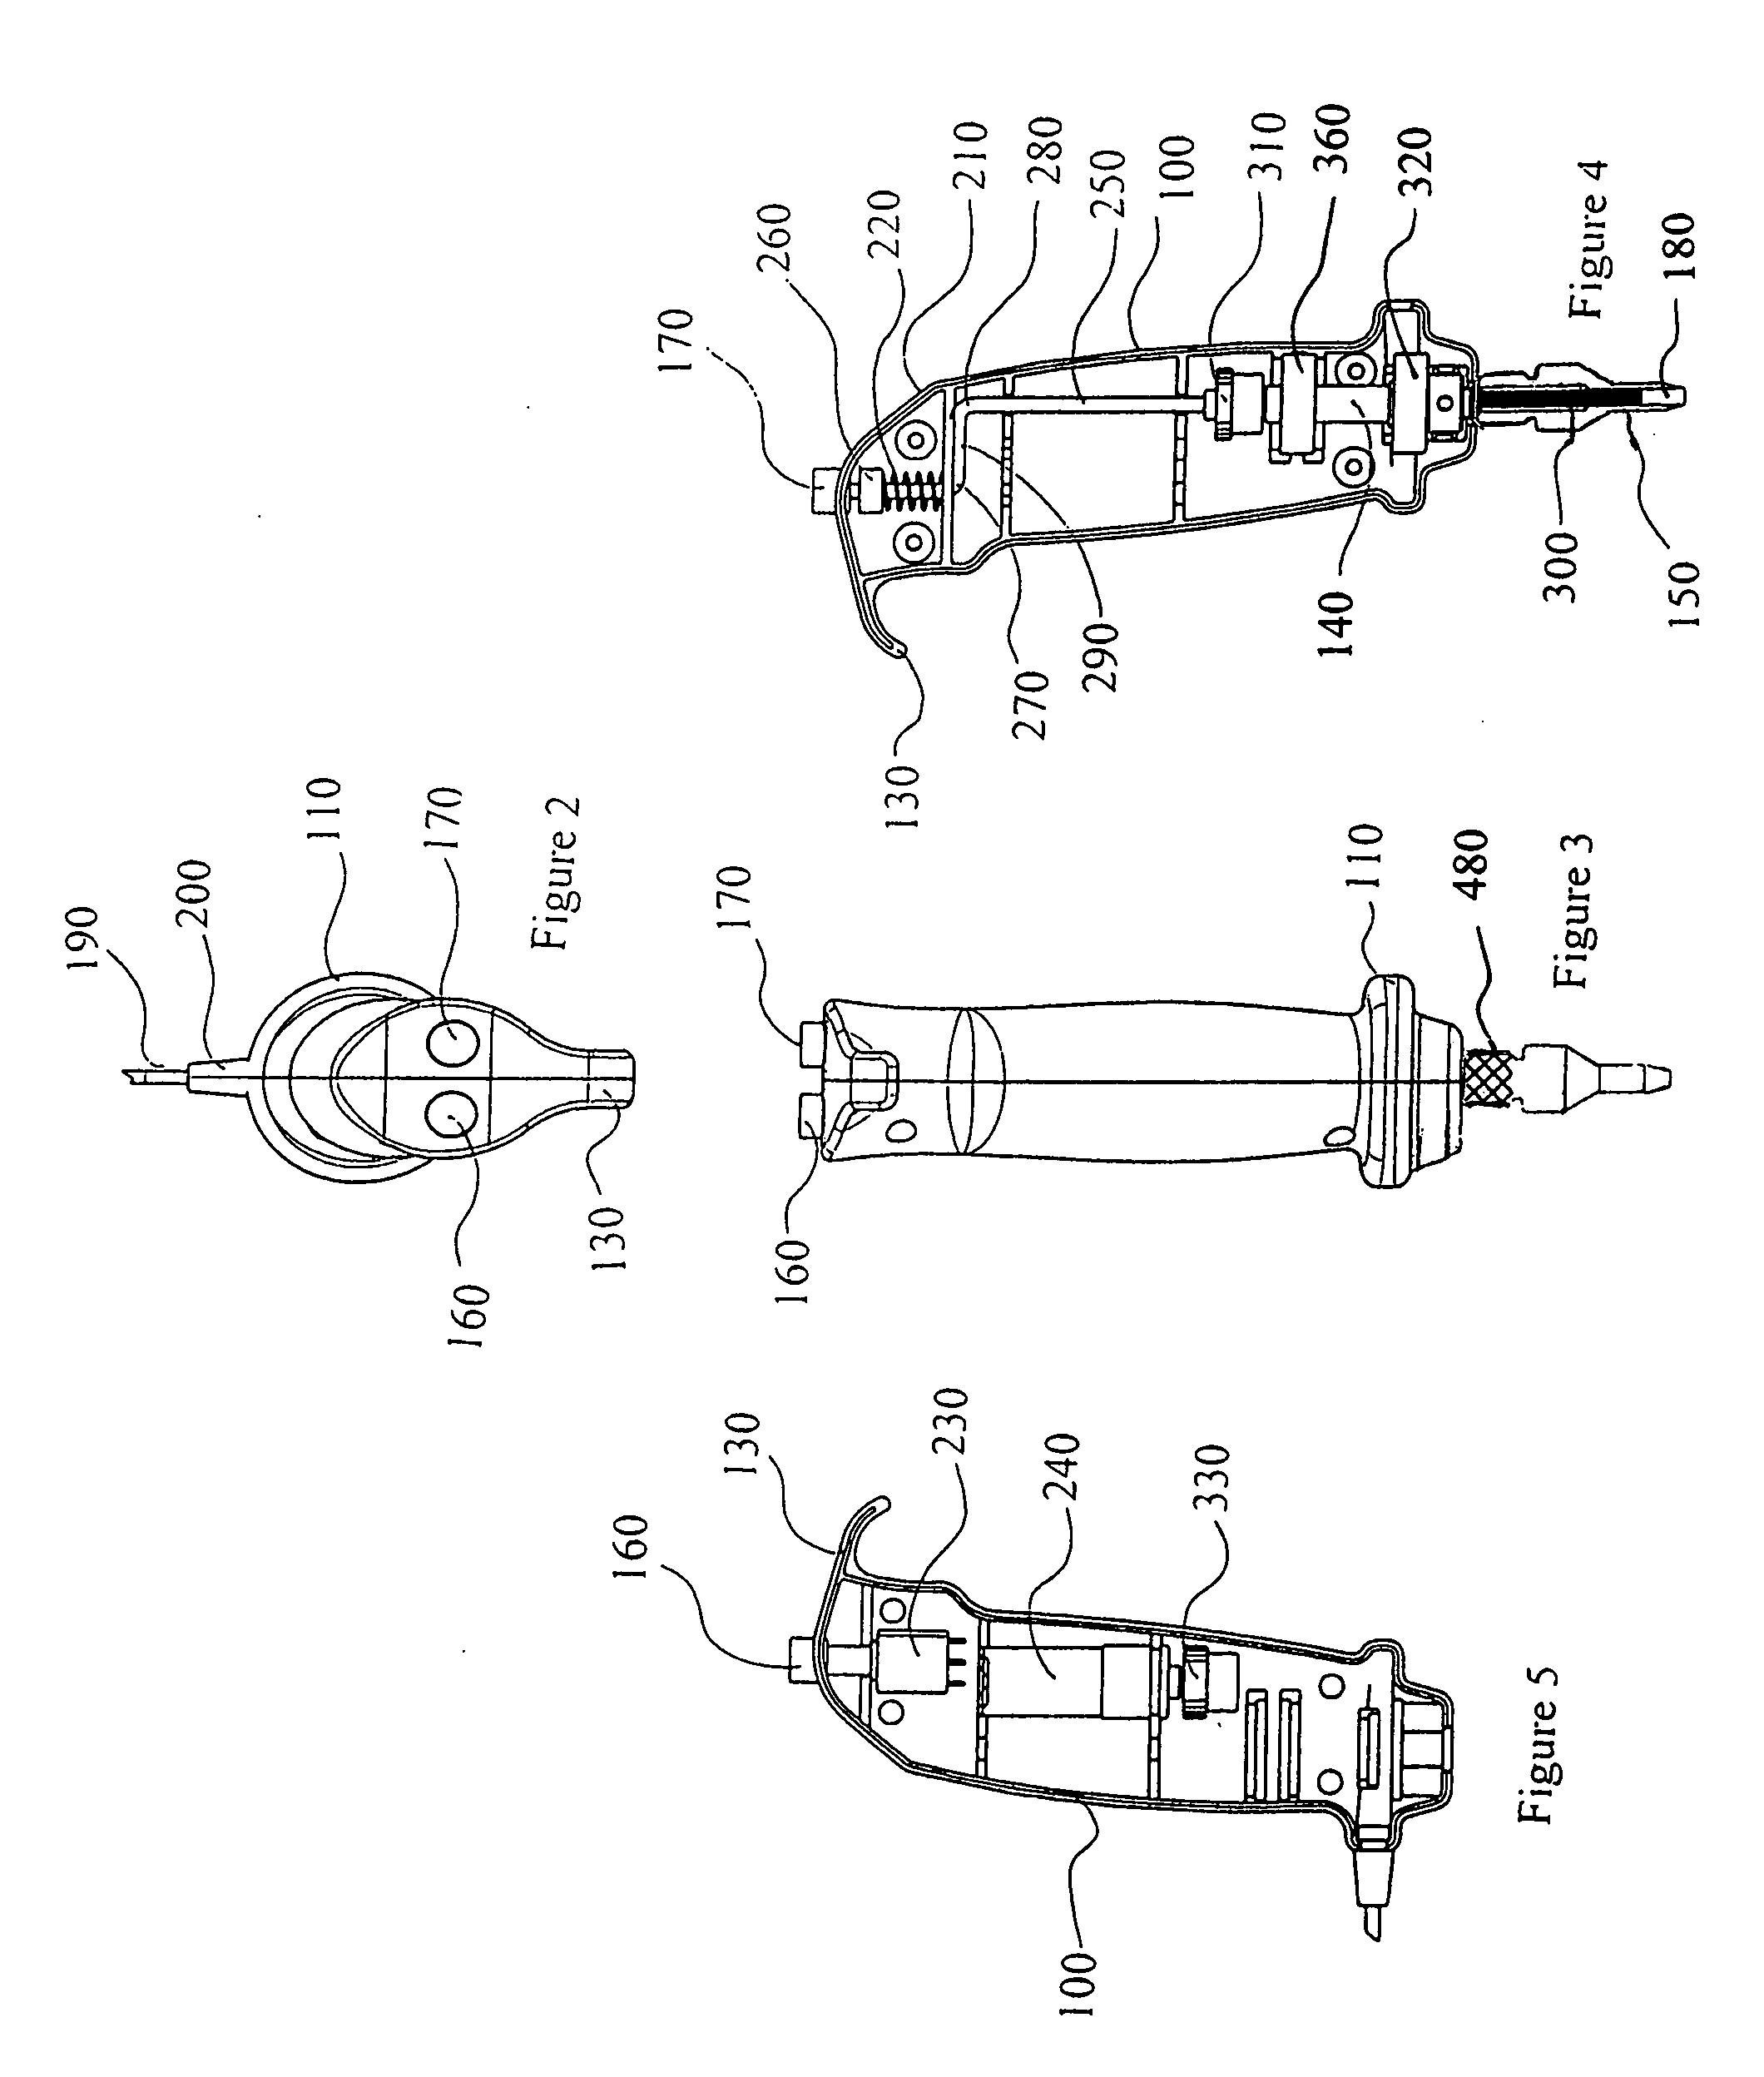 Motor driven rotational sampling apparatus with removable cutting tools for material collection